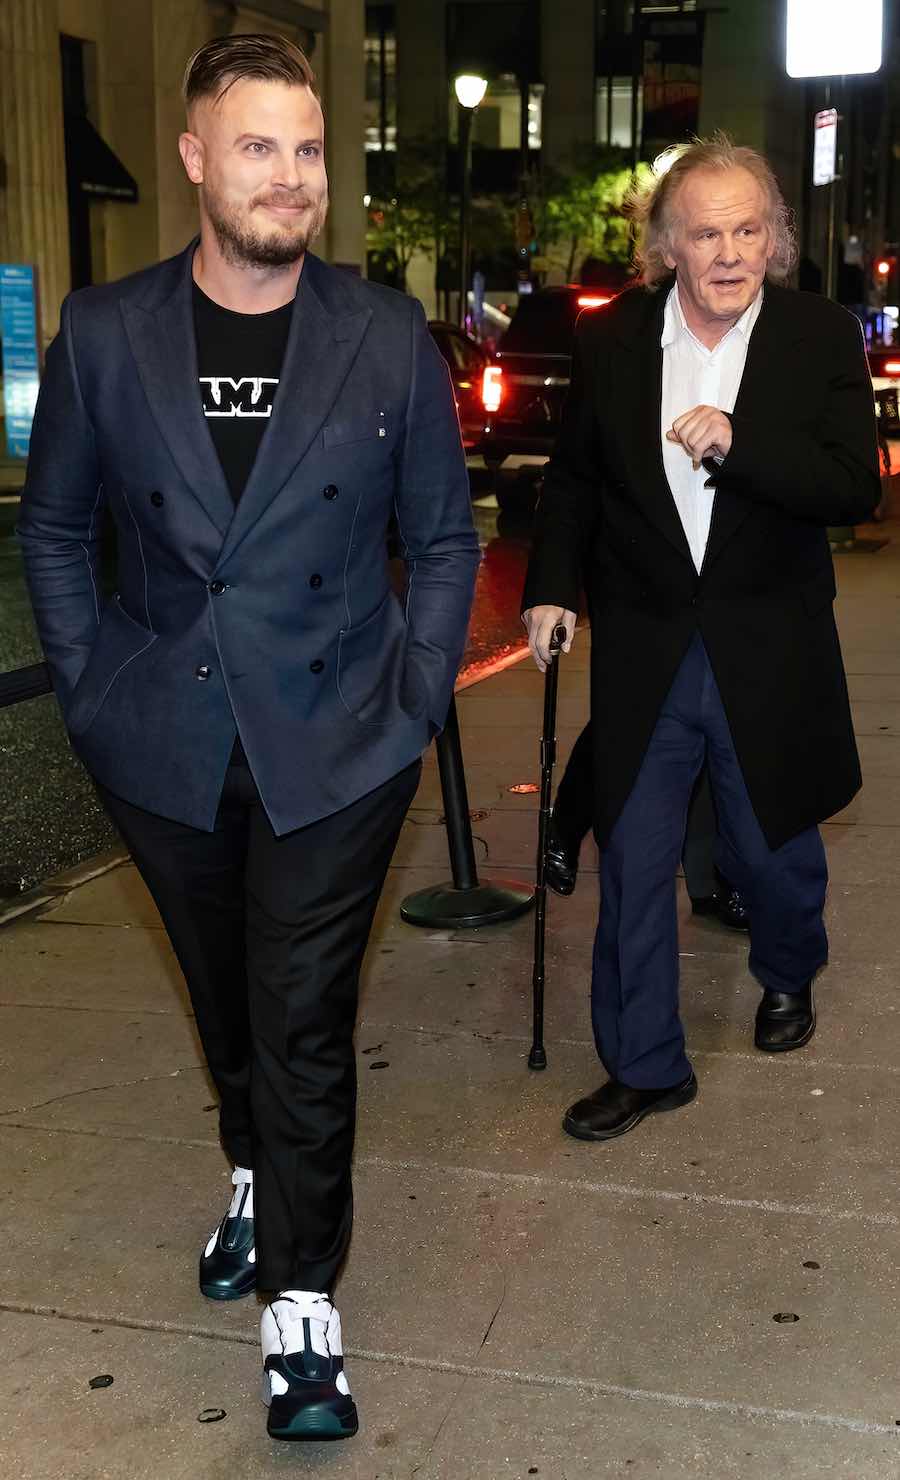 while the rest of Philadelphia was celebrating the Phillies going to the World Series, Nick Nolte showed up for a screening of his new movie Rittenhouse Square